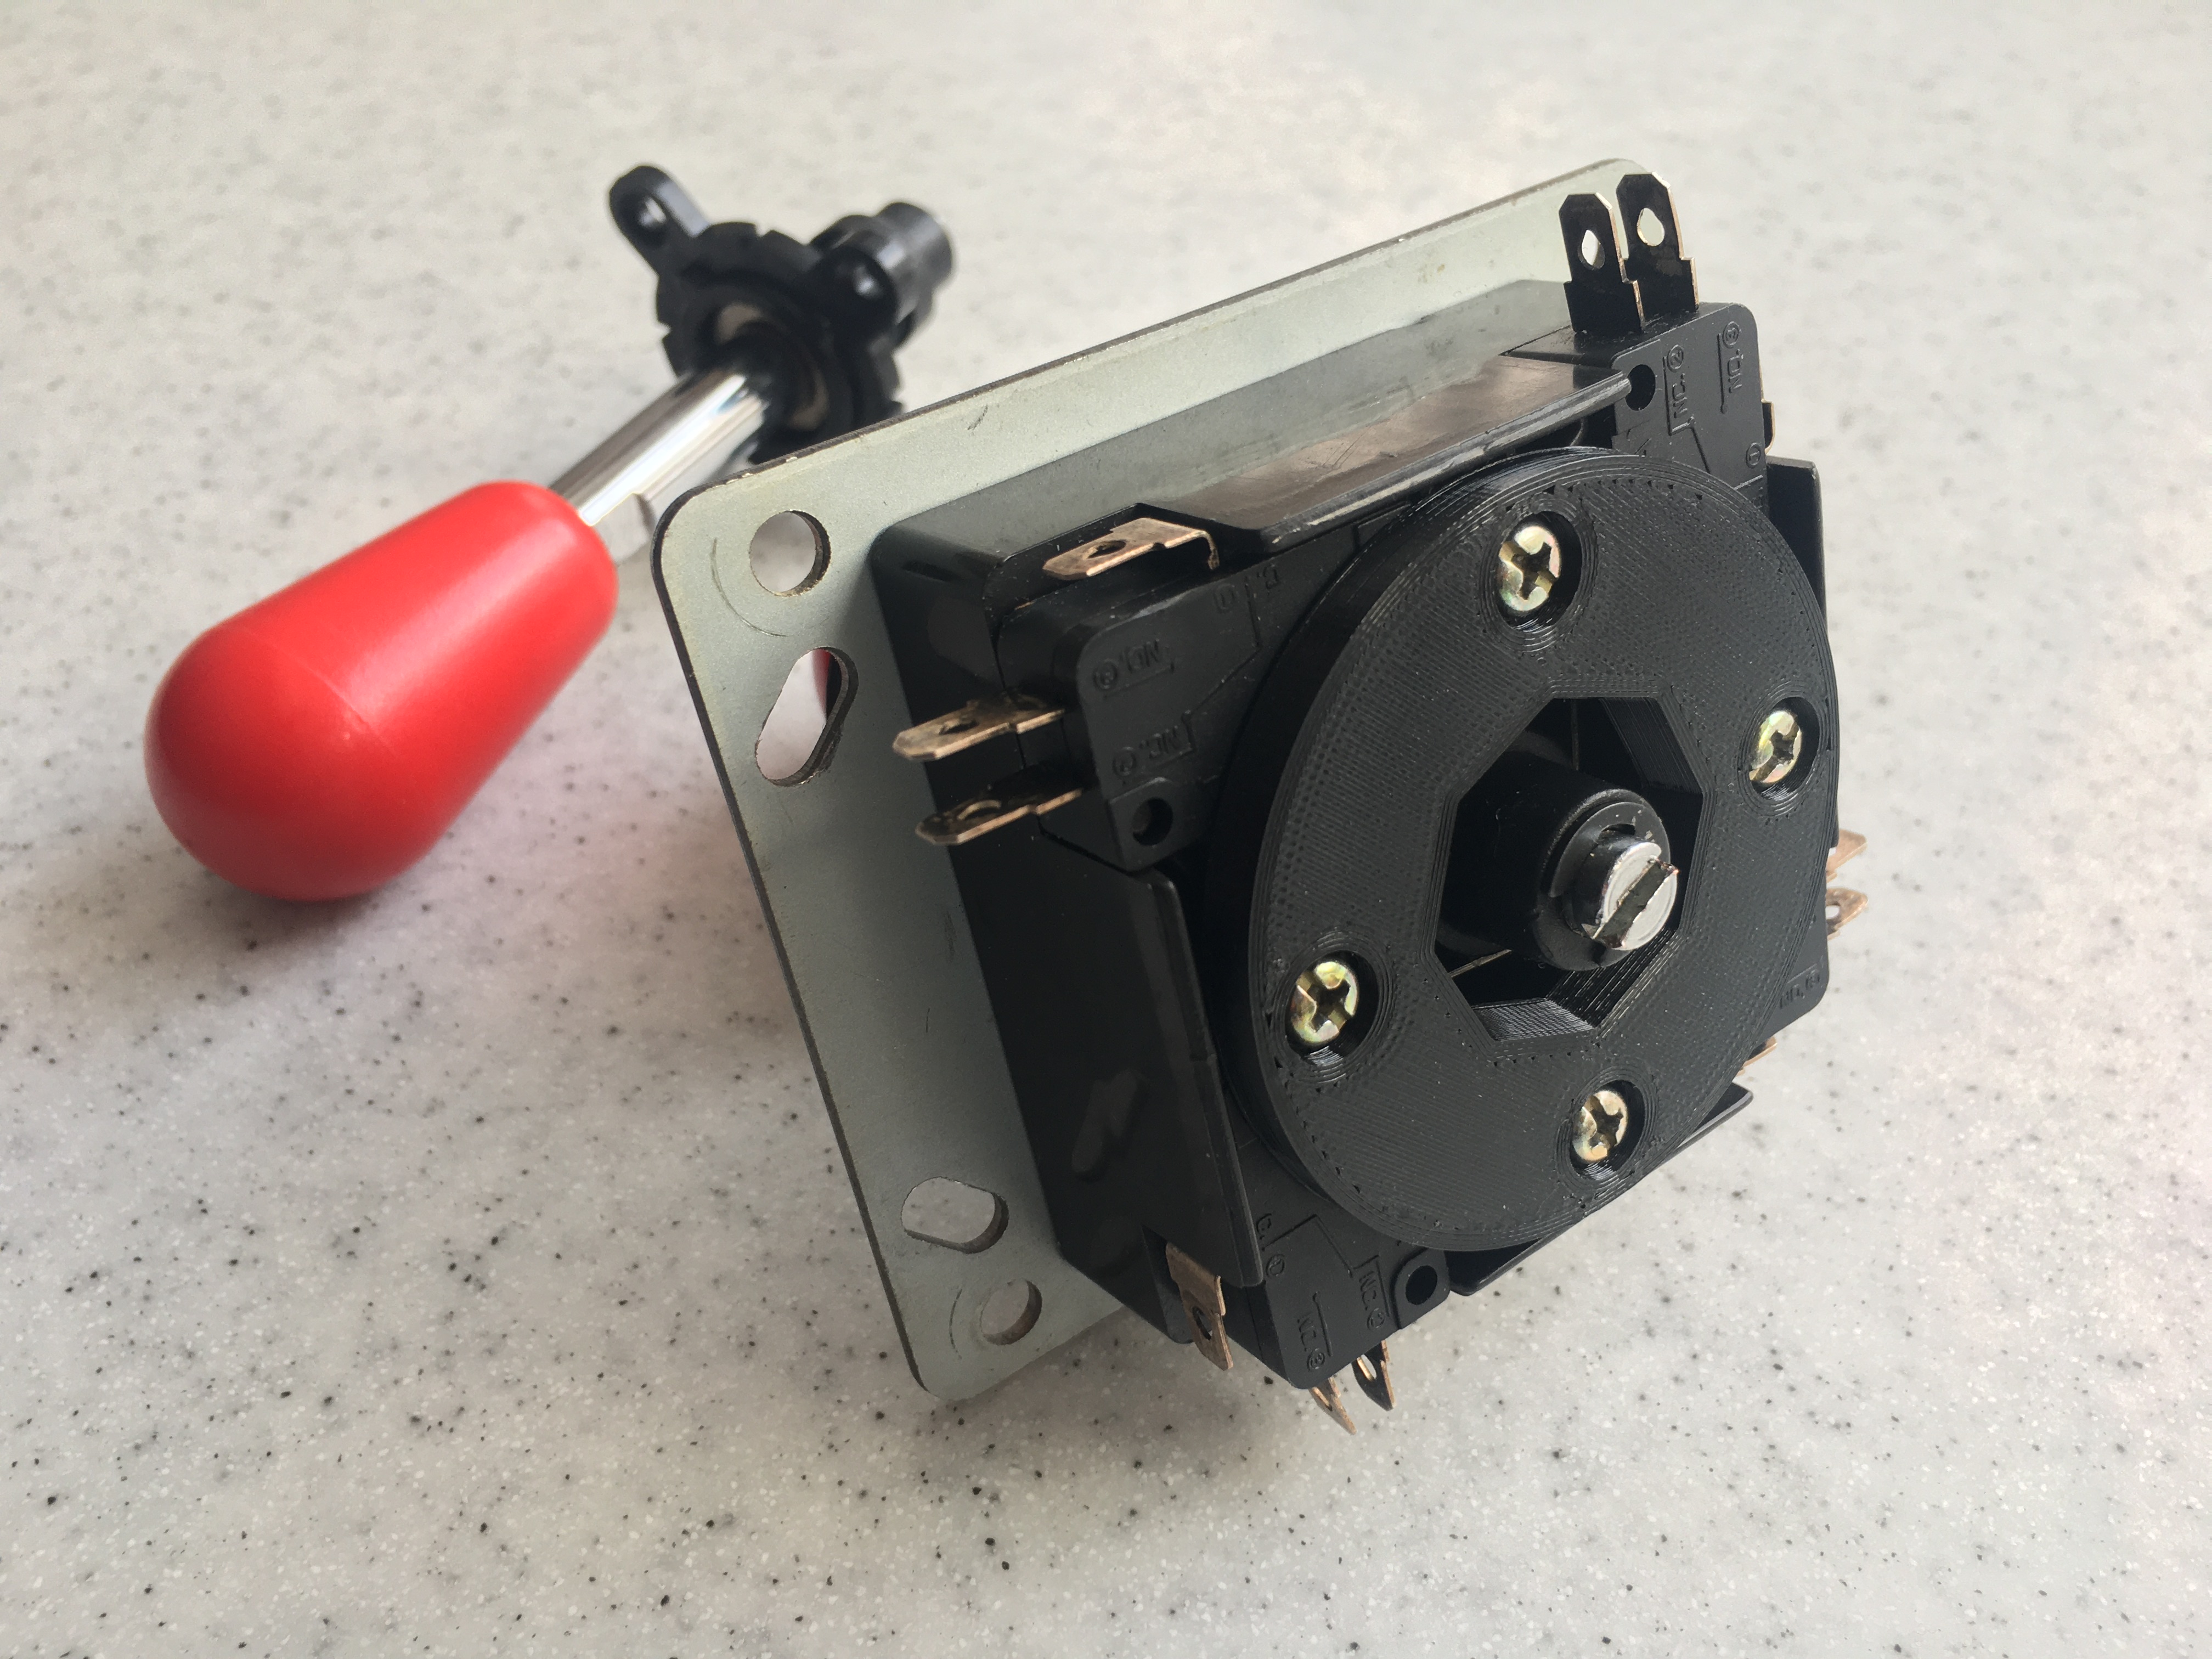 8-way Directional restrictor for the Sanwa JLW arcade joystick